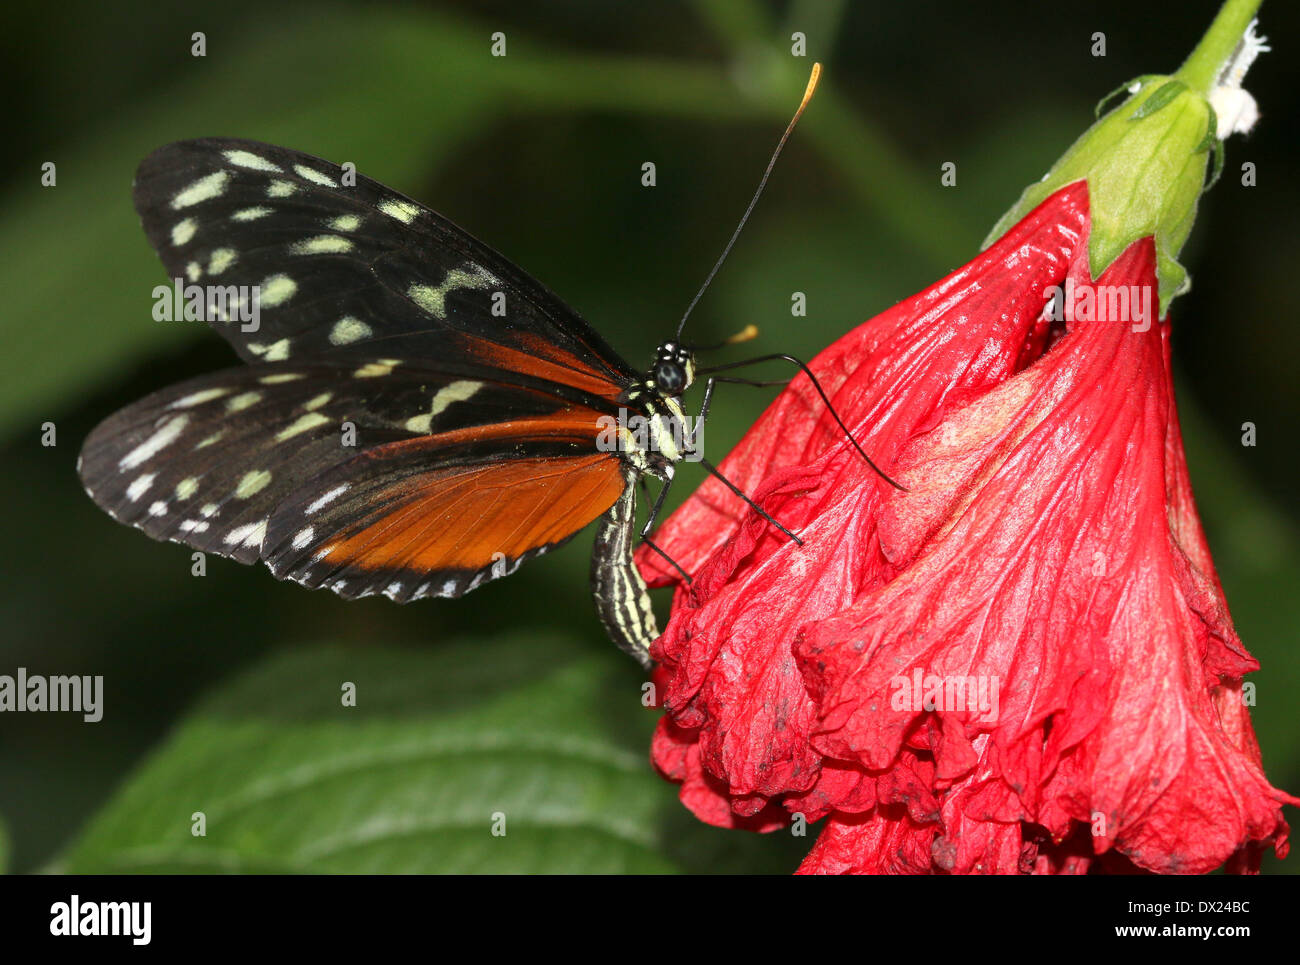 Tiger Longwing, Hecale Longwing or Golden Longwing butterfly (Heliconius hecale) foraging on a red tropical flower Stock Photo